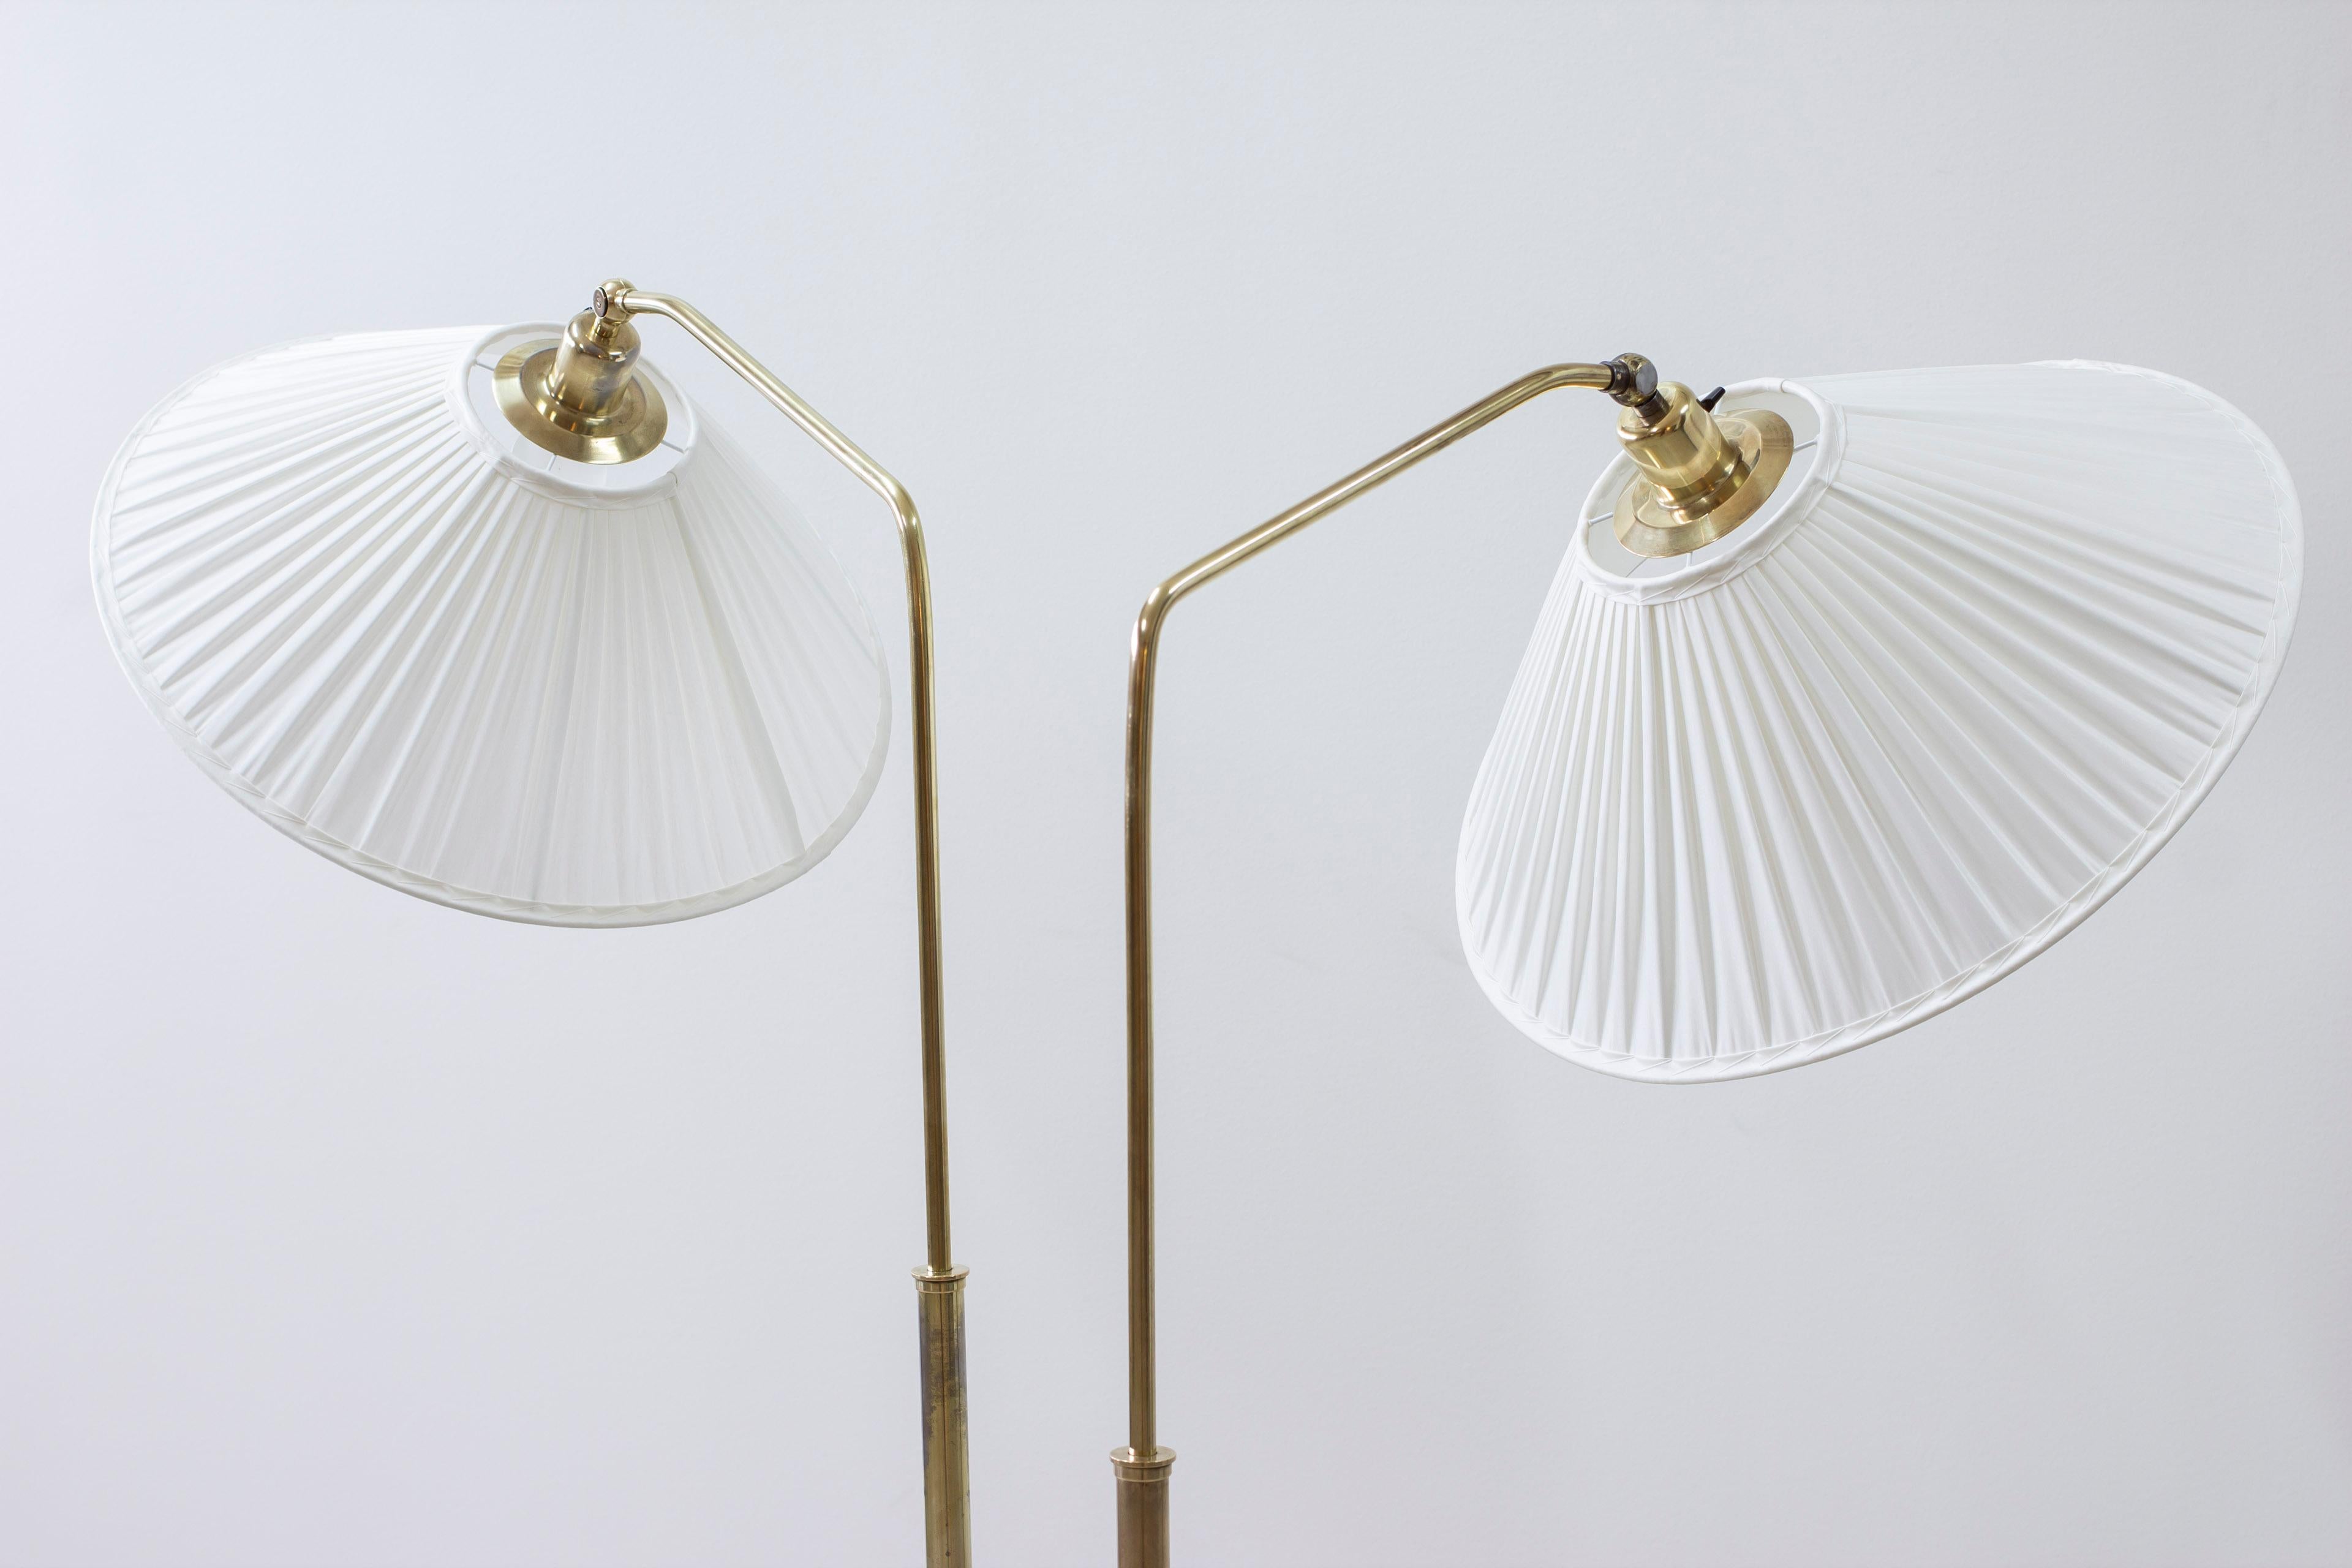 Mid-20th Century Brass and fabric floor lamps by Harald Elof Notini, Böhlmarks, 1940s For Sale